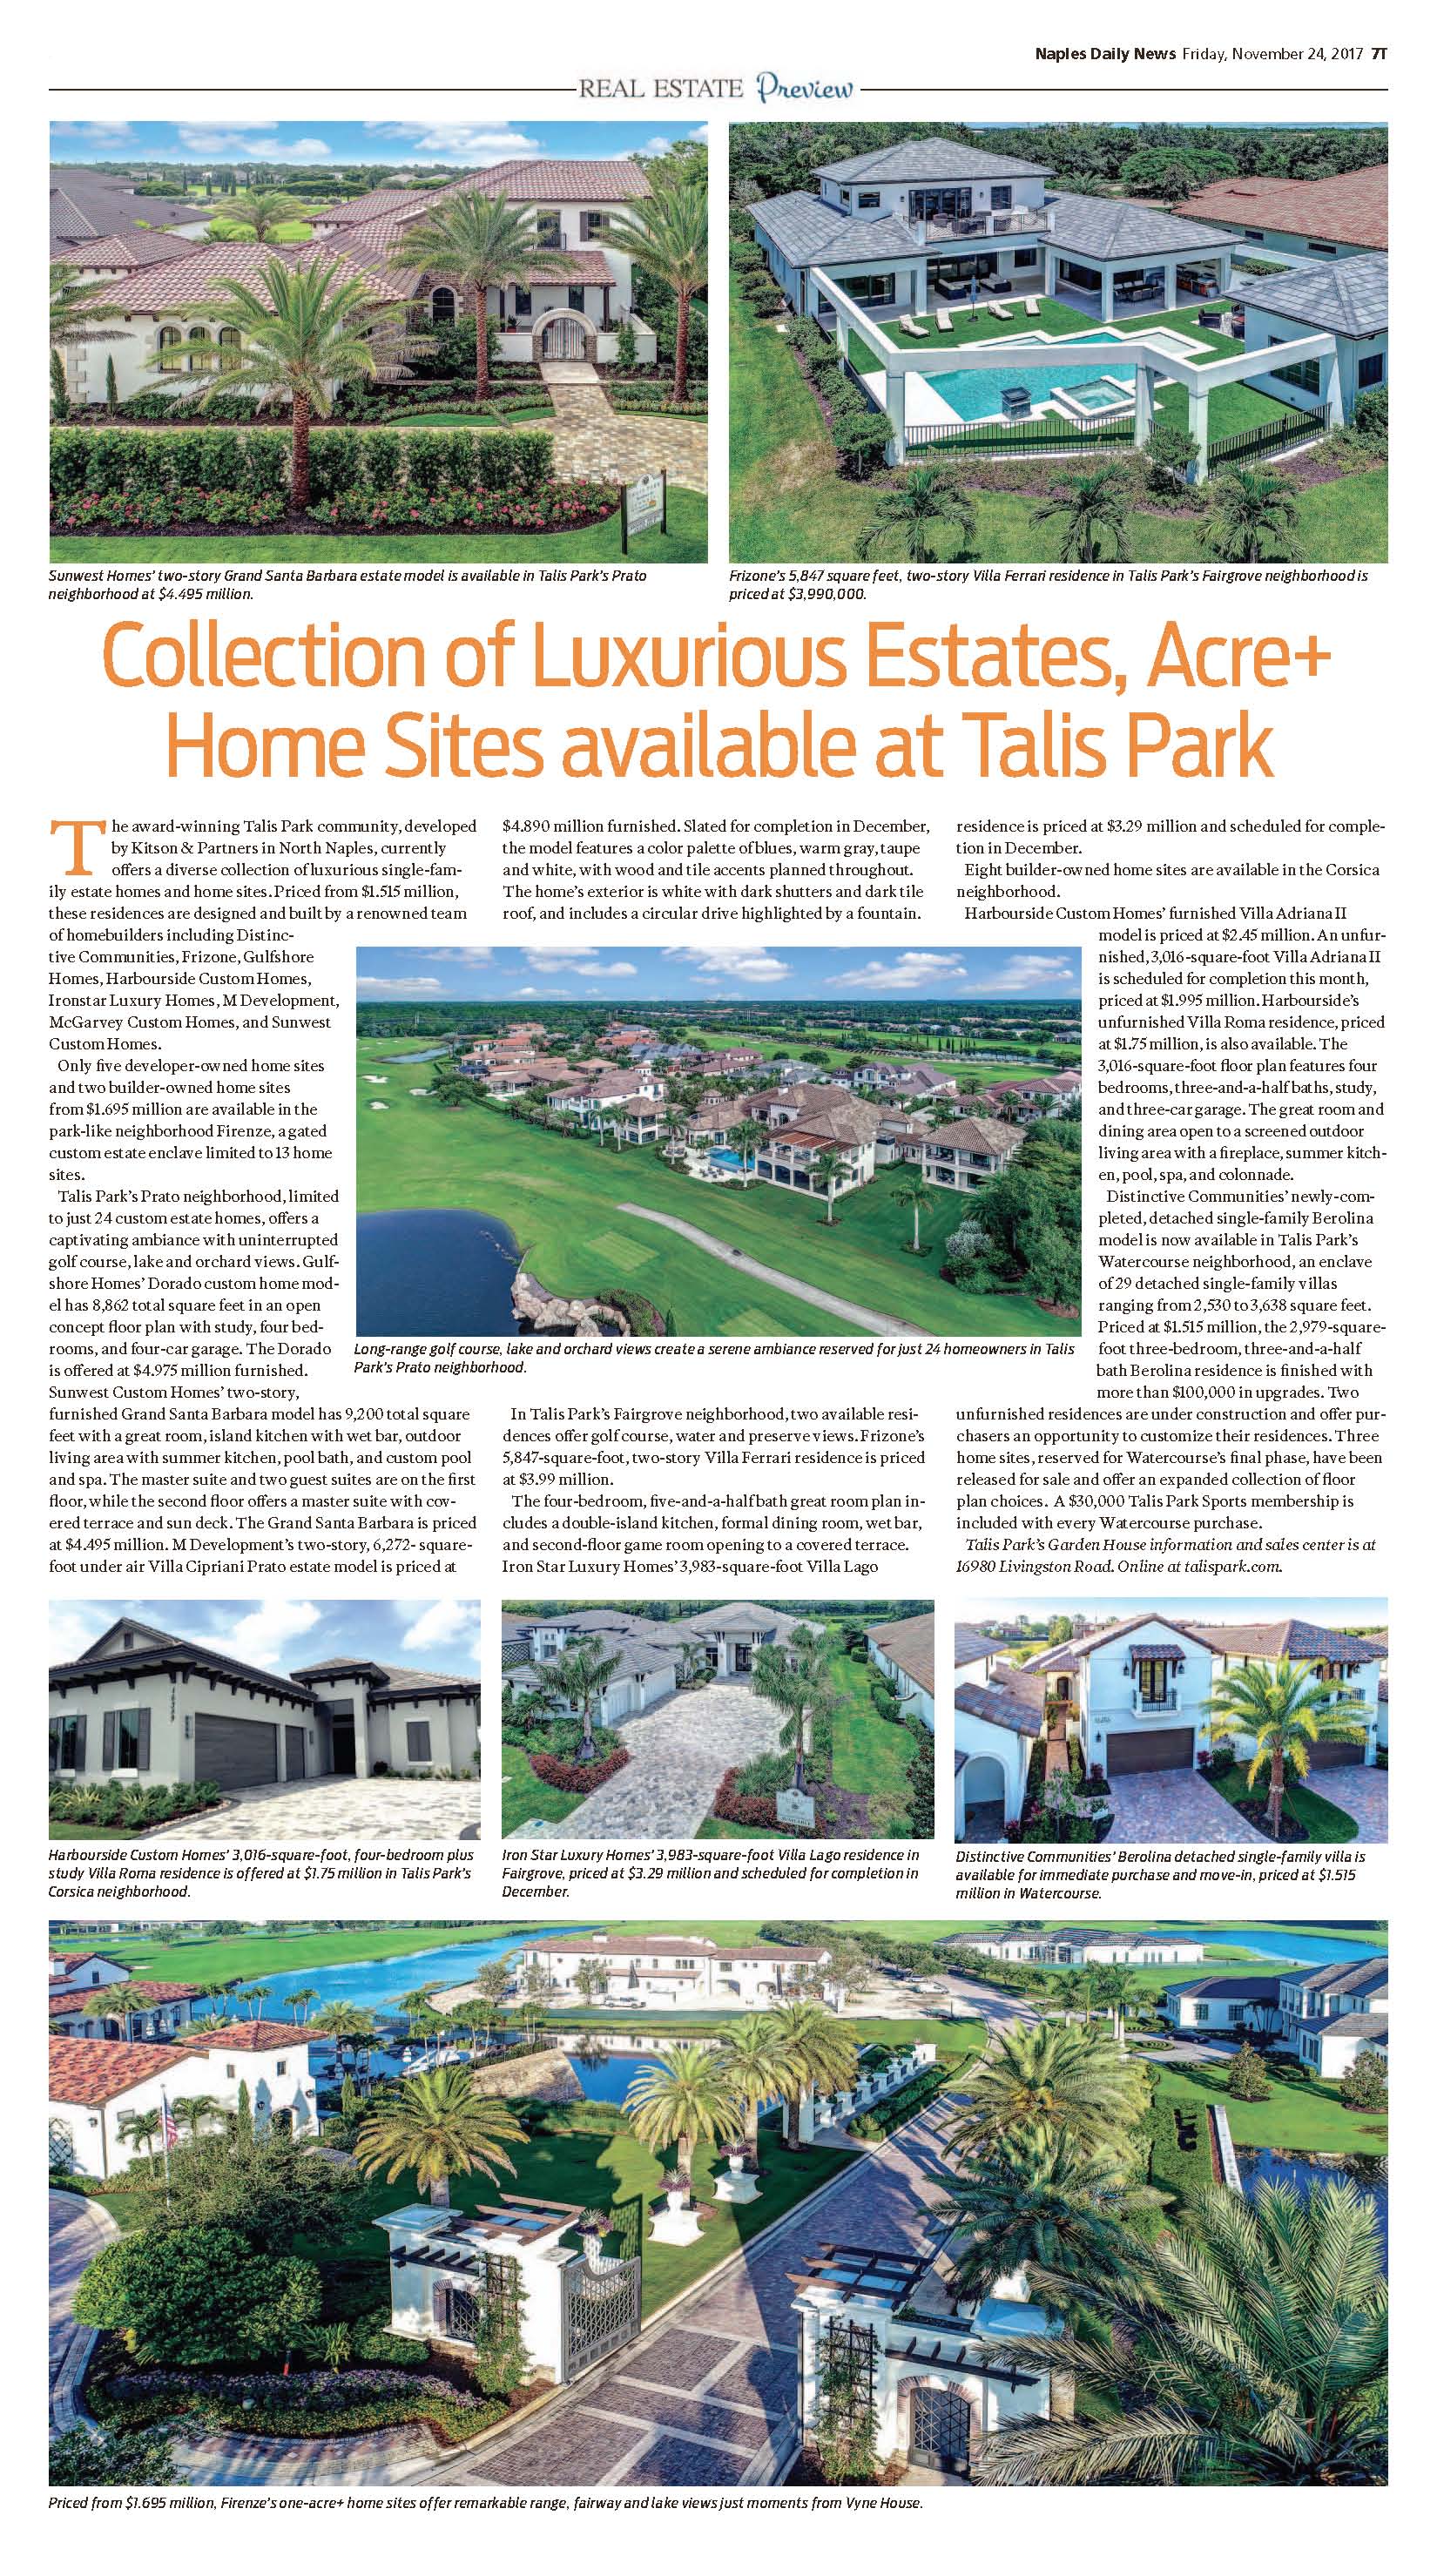 Collection of Luxurious Estates, Acre+ Home Sites Available at Talis Park